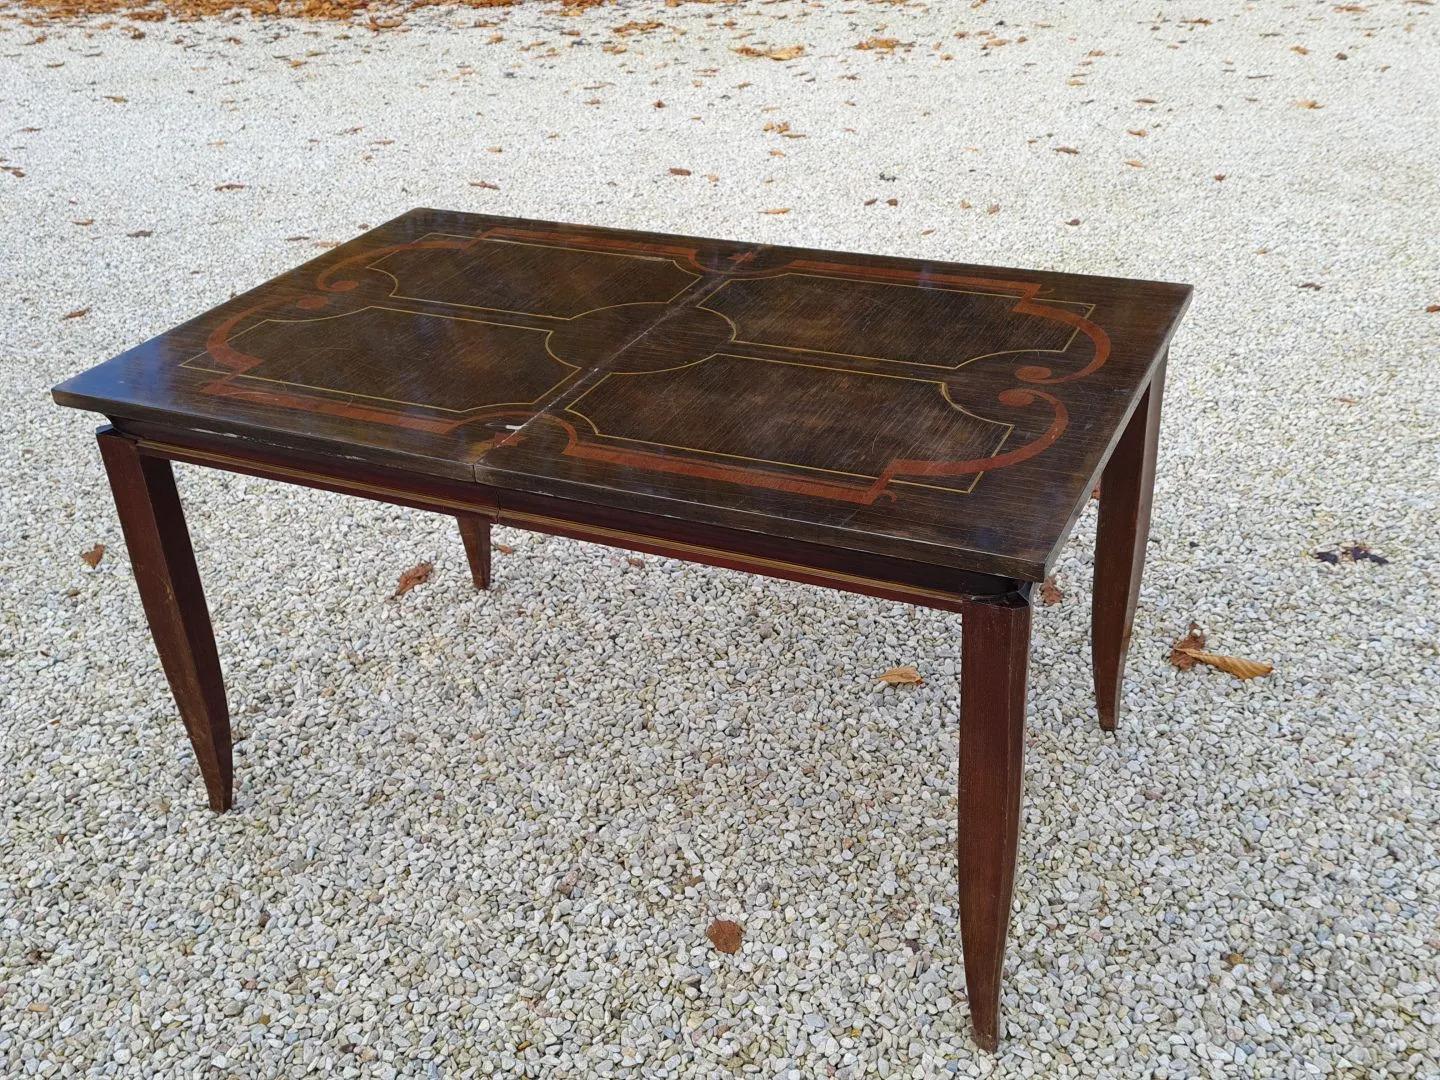 Rare Art Deco table in neoclassical style circa 1940.
very nice marquetry work, connection with or without extension
Dimension: 74 x 130 x 80 cm
74 x 185 x 80 cm with extension.